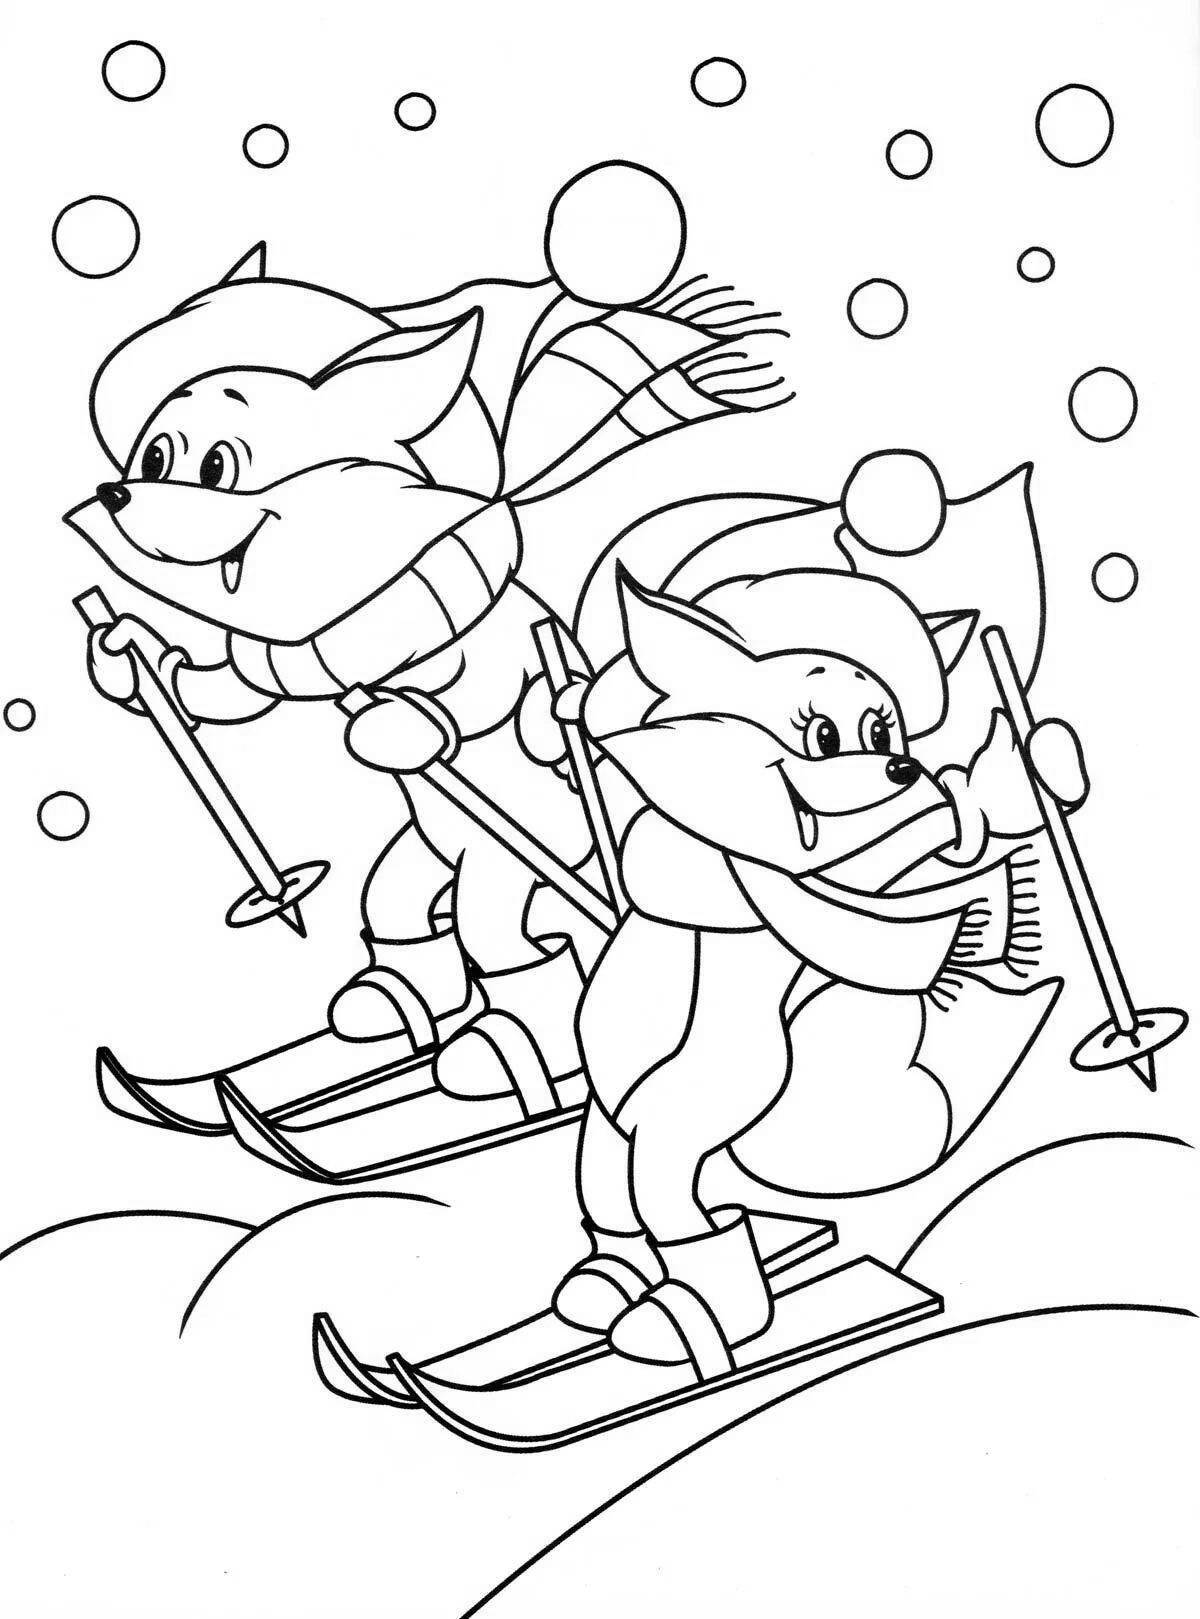 Fantastic winter sports coloring book for 6-7 year olds